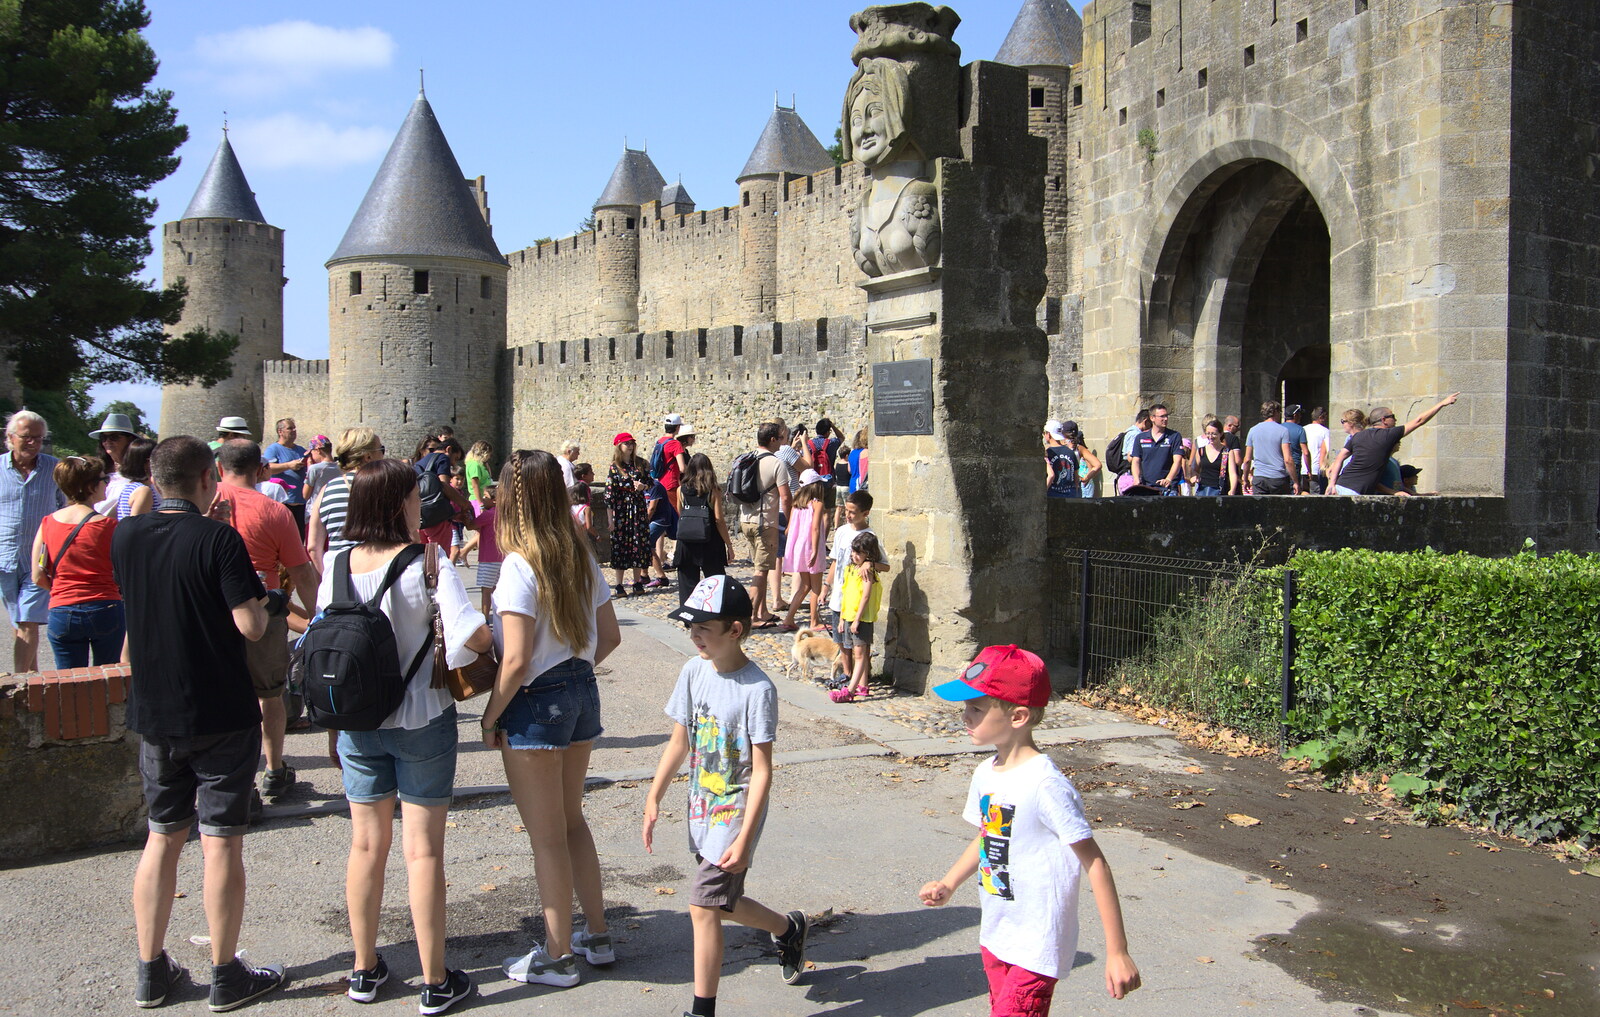 It's busy at the Porte Narbonnaise from A Trip to Carcassonne, Aude, France - 8th August 2018